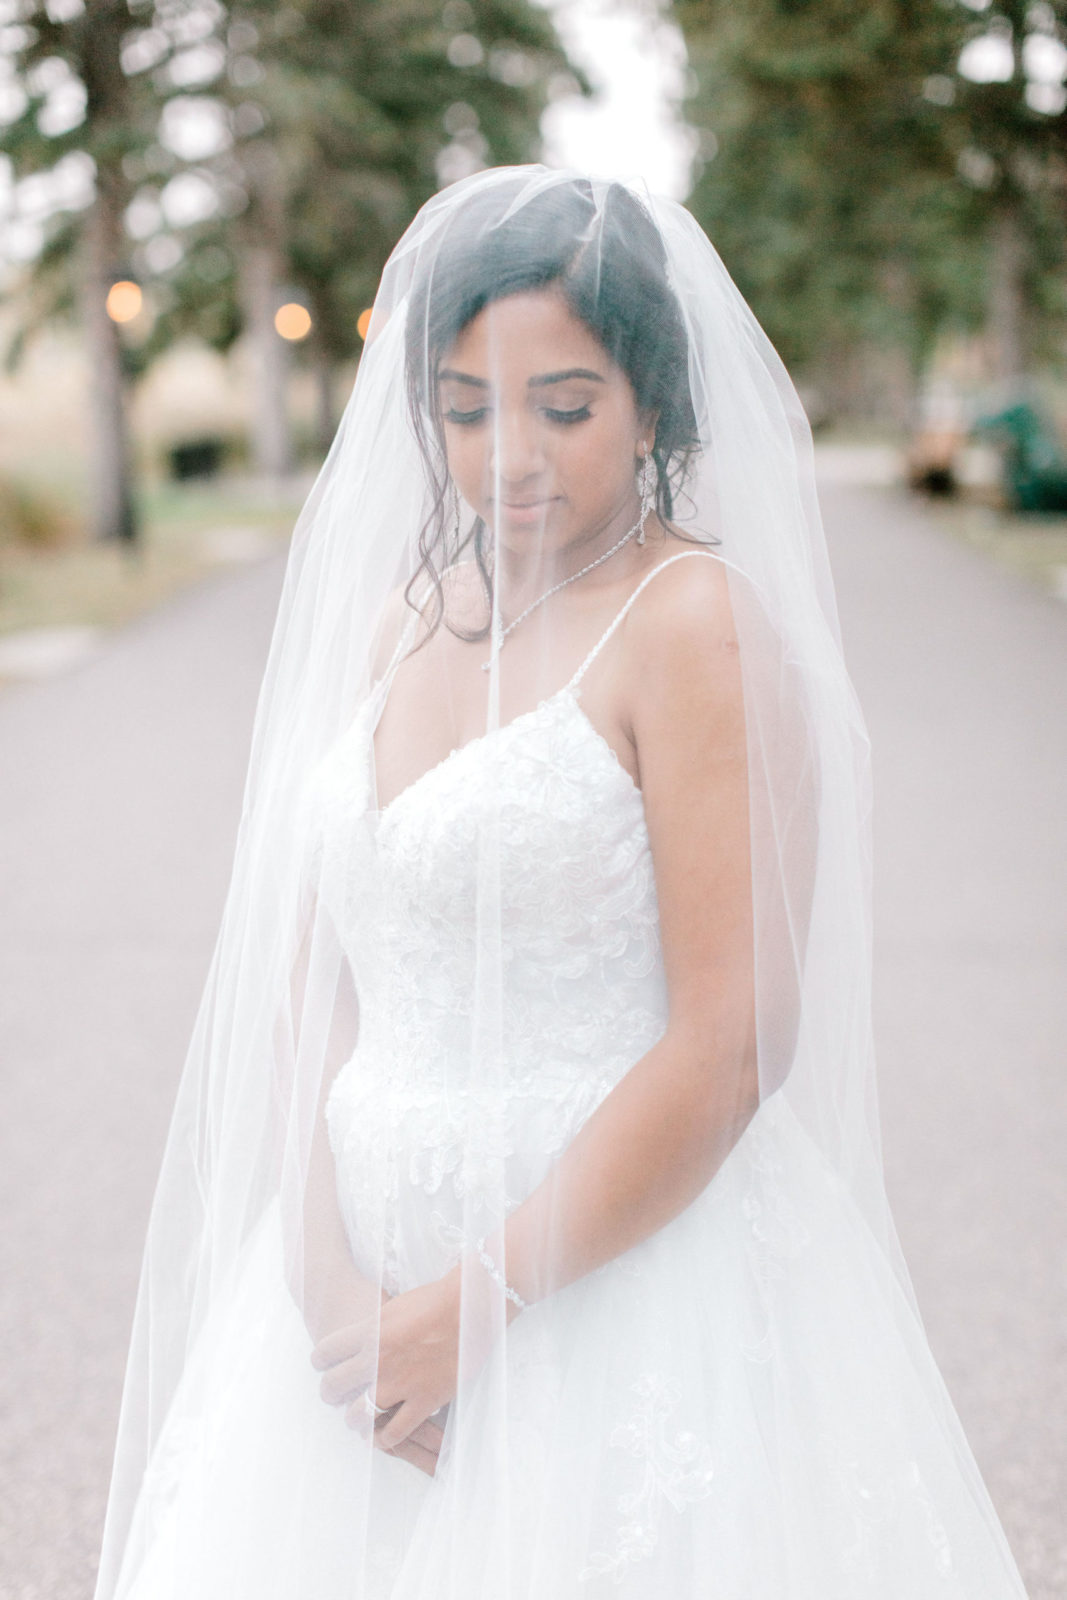 Stunning bridal portrait with flowing veil